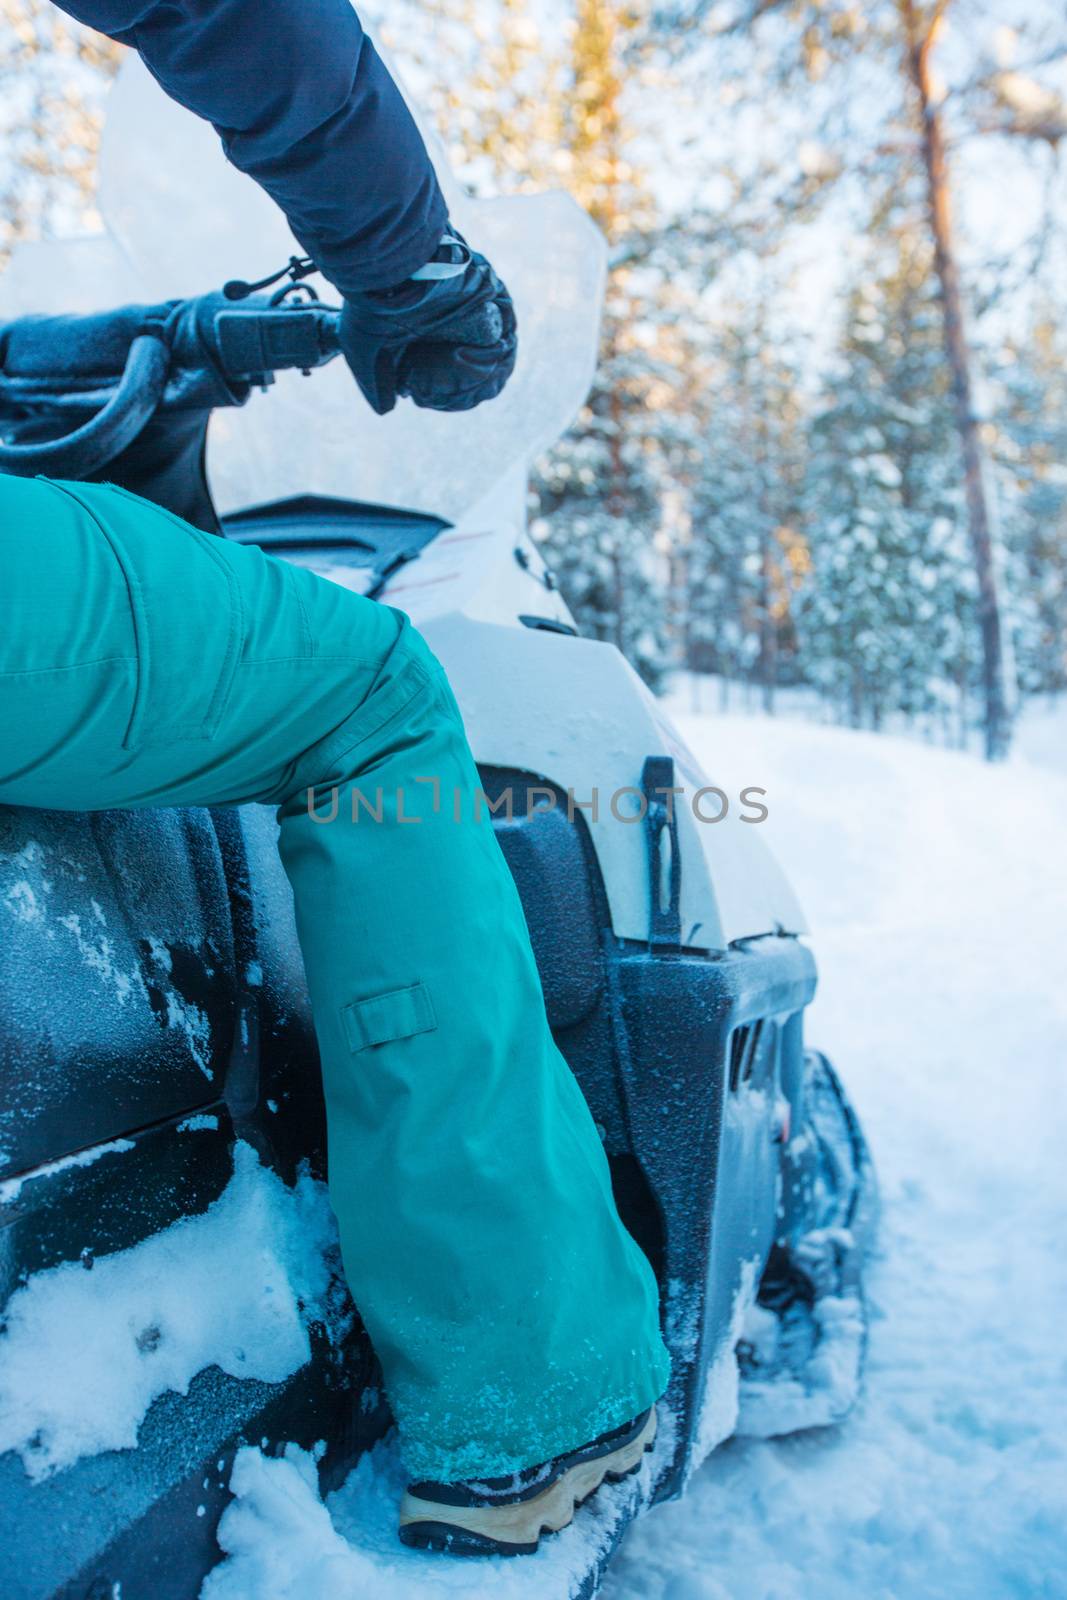 Rider on the snowmobile in winter snow in the morning side view unrecognizible person